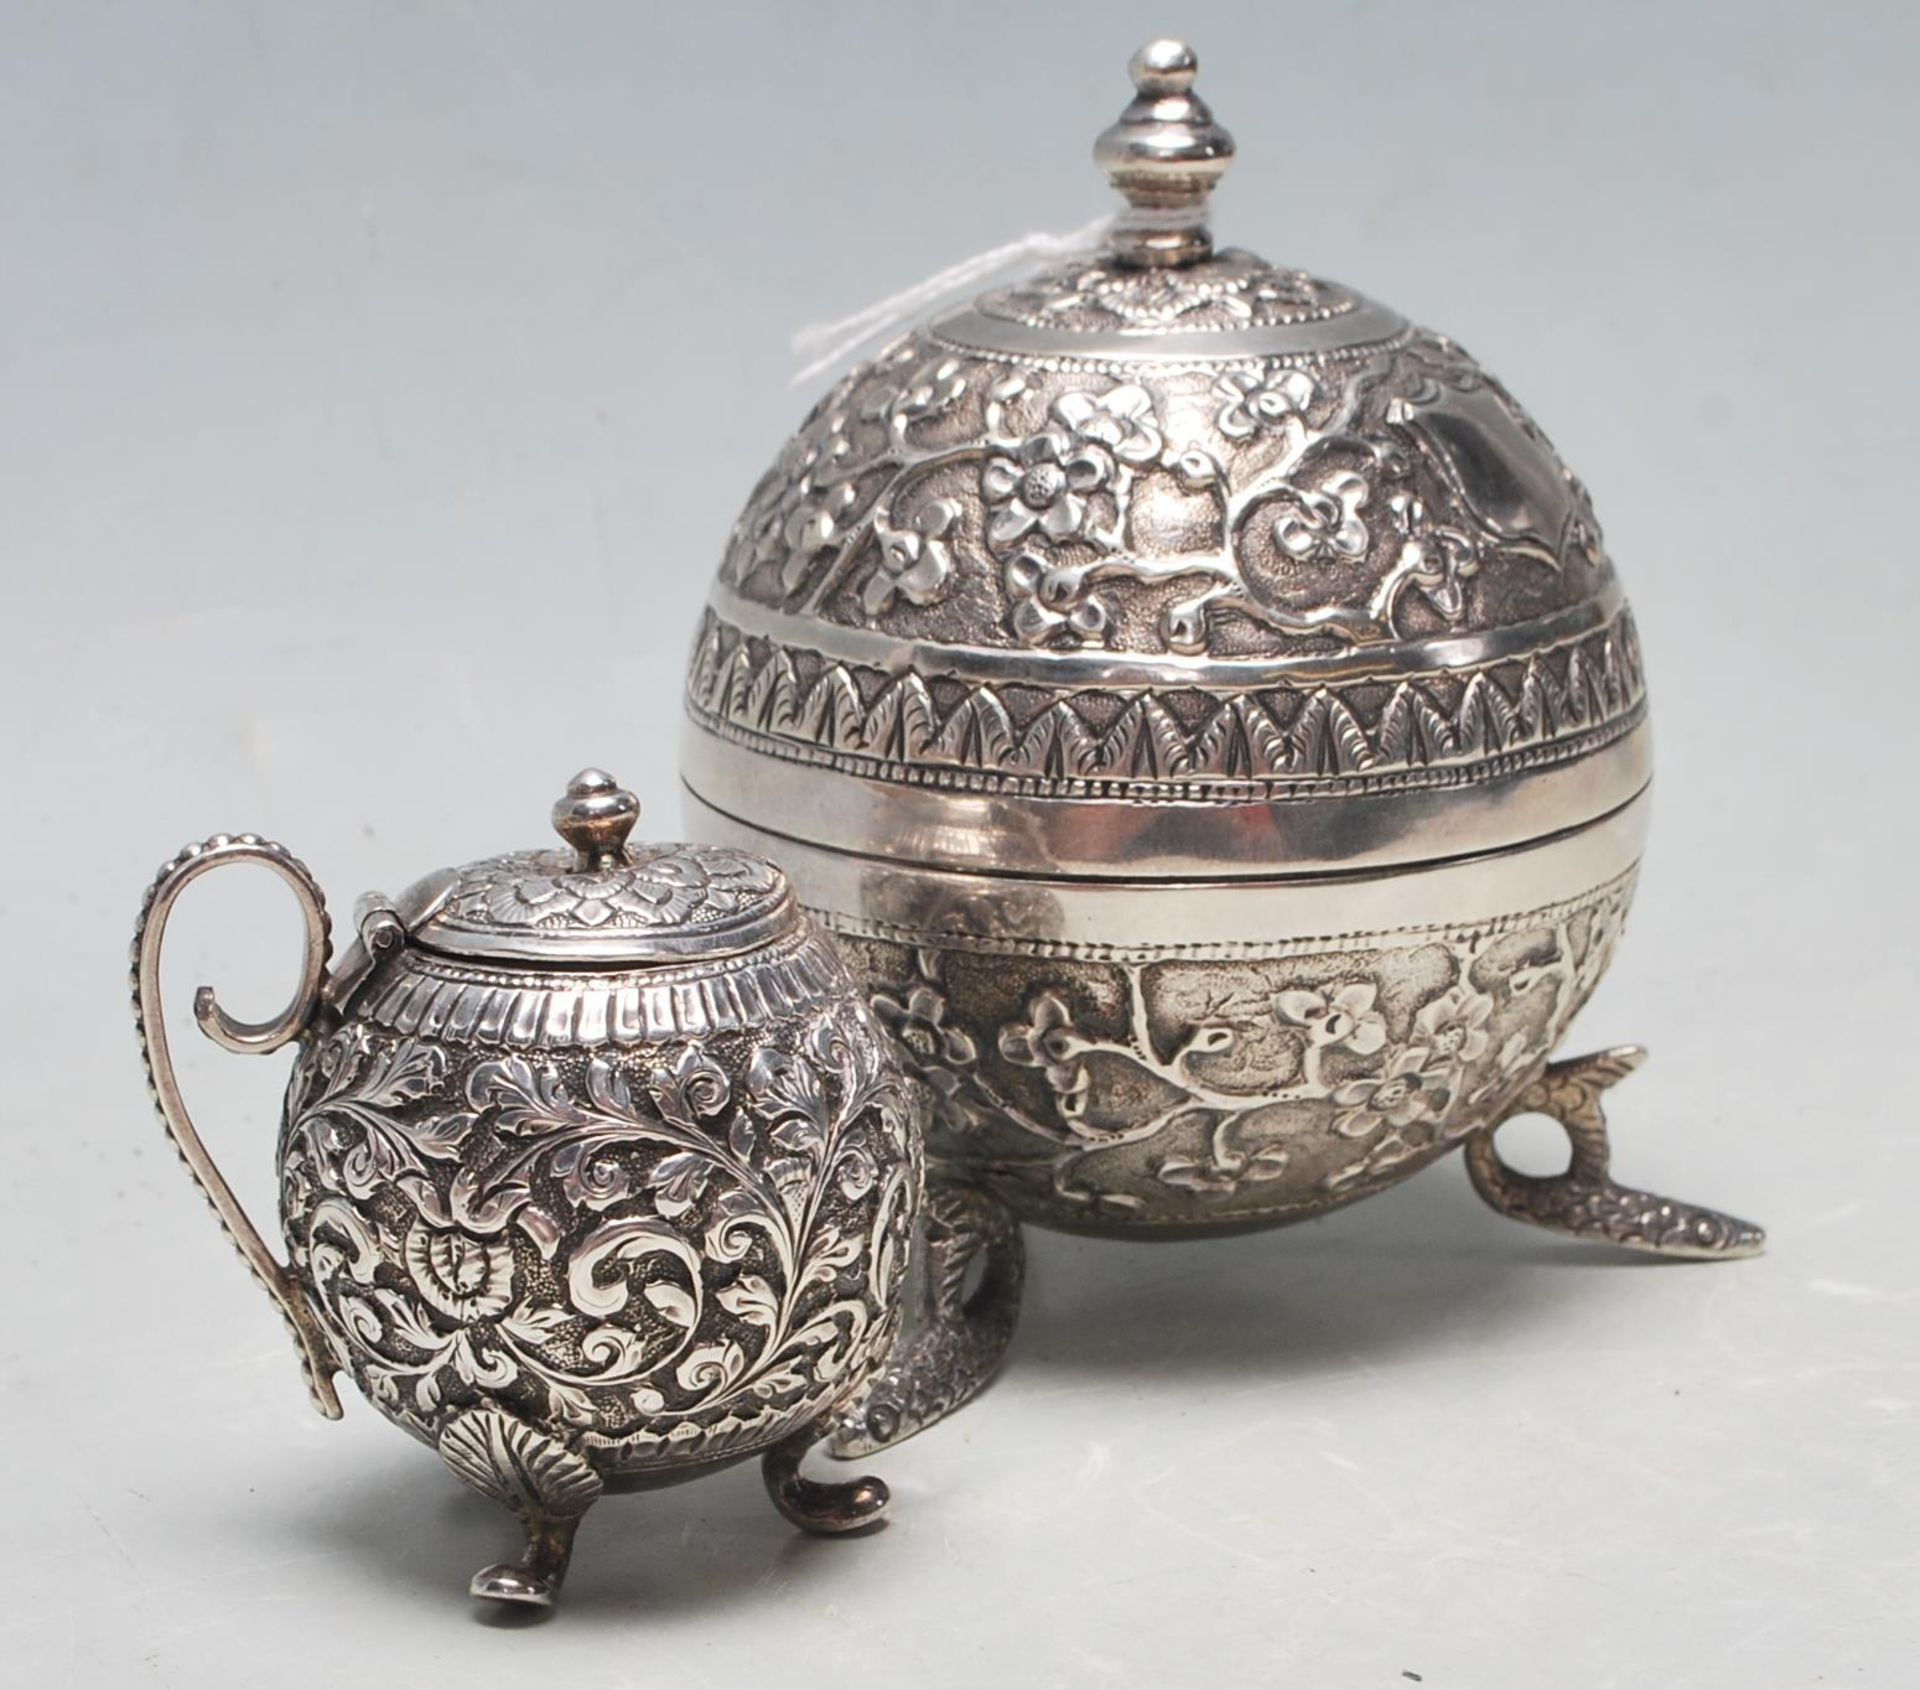 INDIAN SILVER LIDDED BOWL WITH FLORAL MOTIFS DECORATION